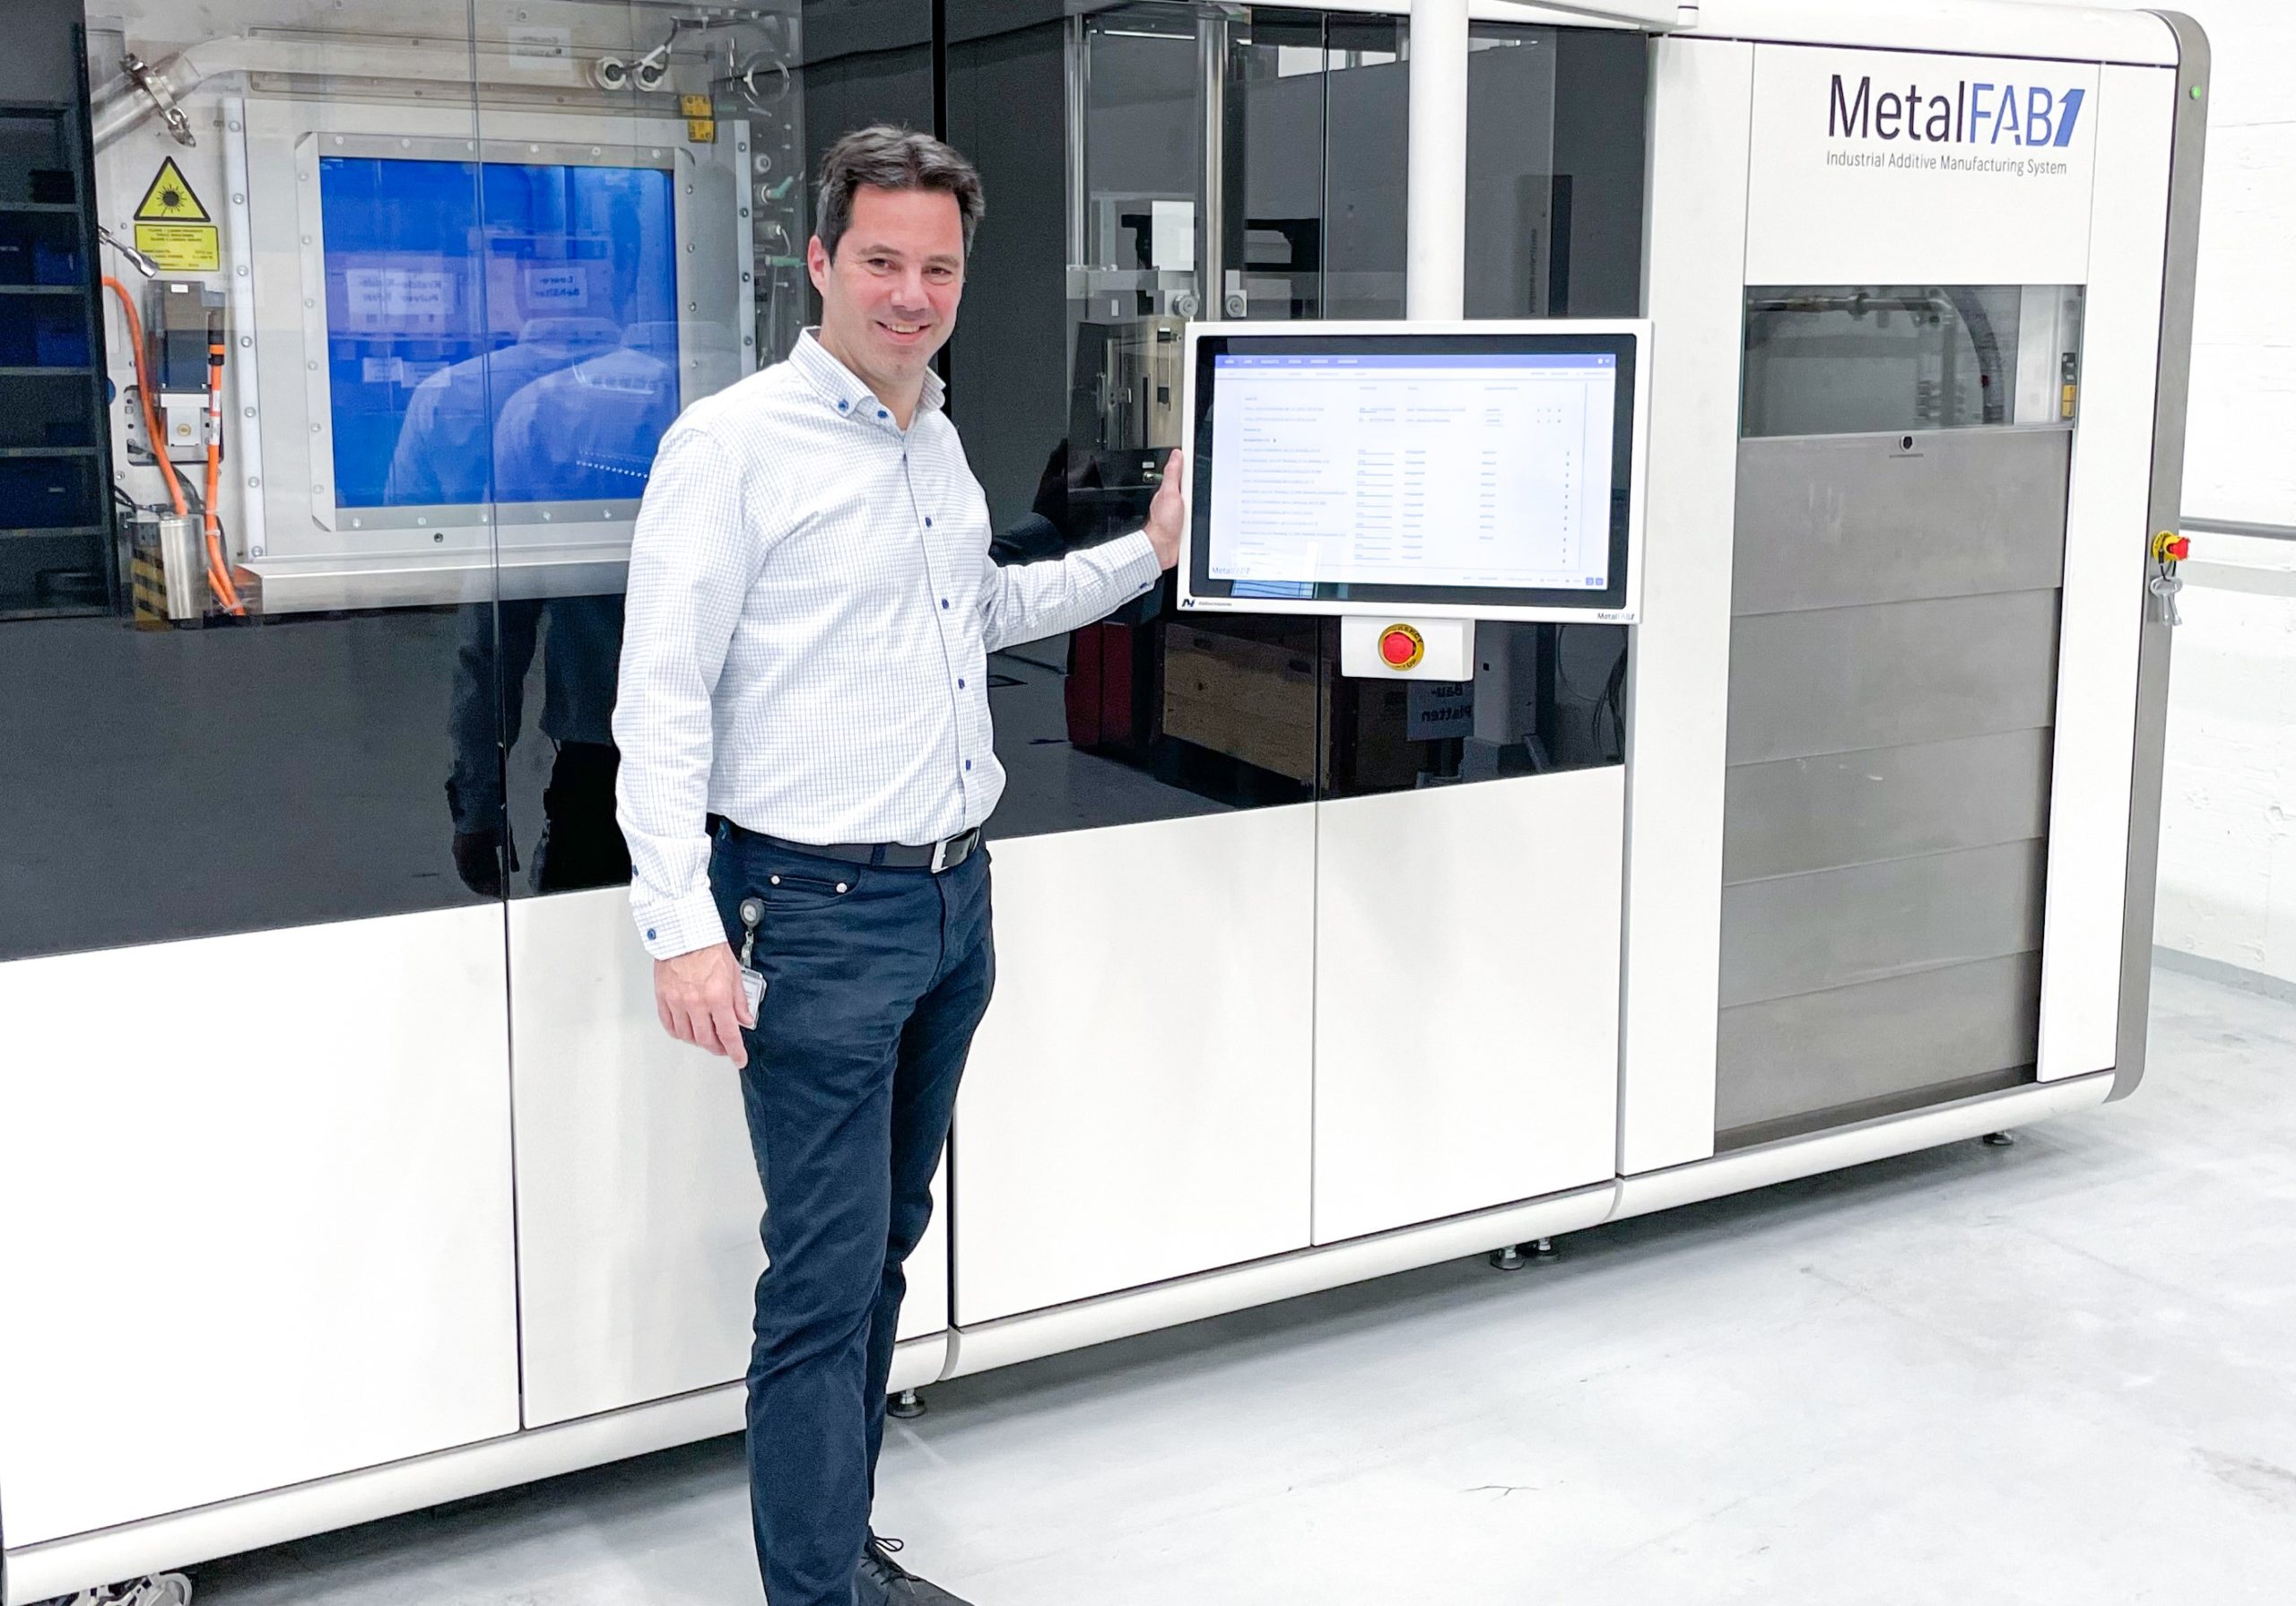 Egon Seegers, General Manager Service Parts of ABB Switzerland Ltd, Turbocharging next to the MetalFAB1 system. Image courtesy of Additive Industries. 